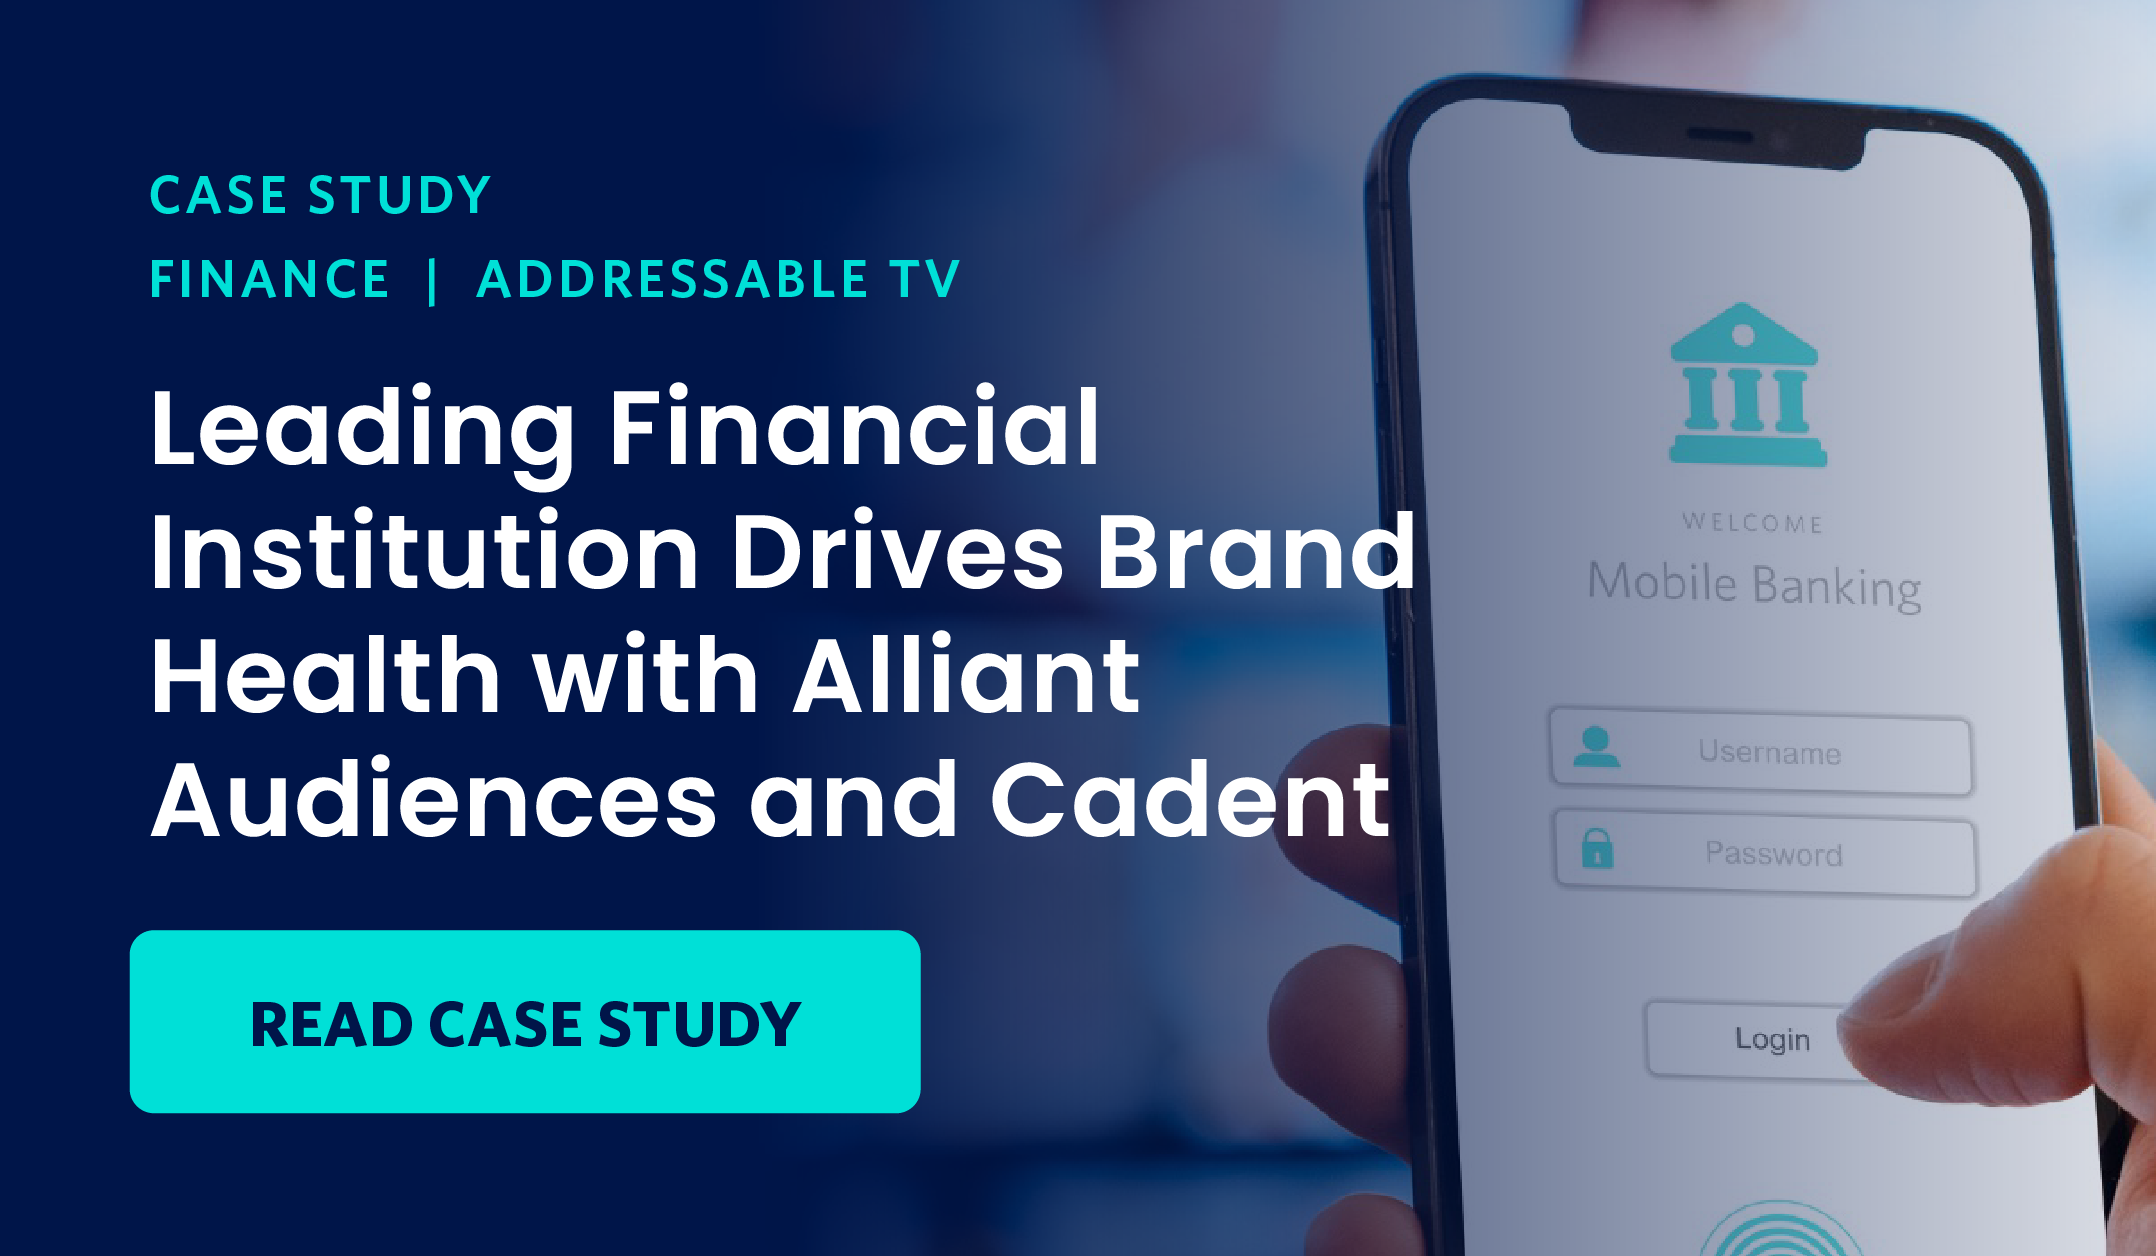 Case study: Leading Financial Institution Drives Brand Health with Alliant Audiences and Cadent